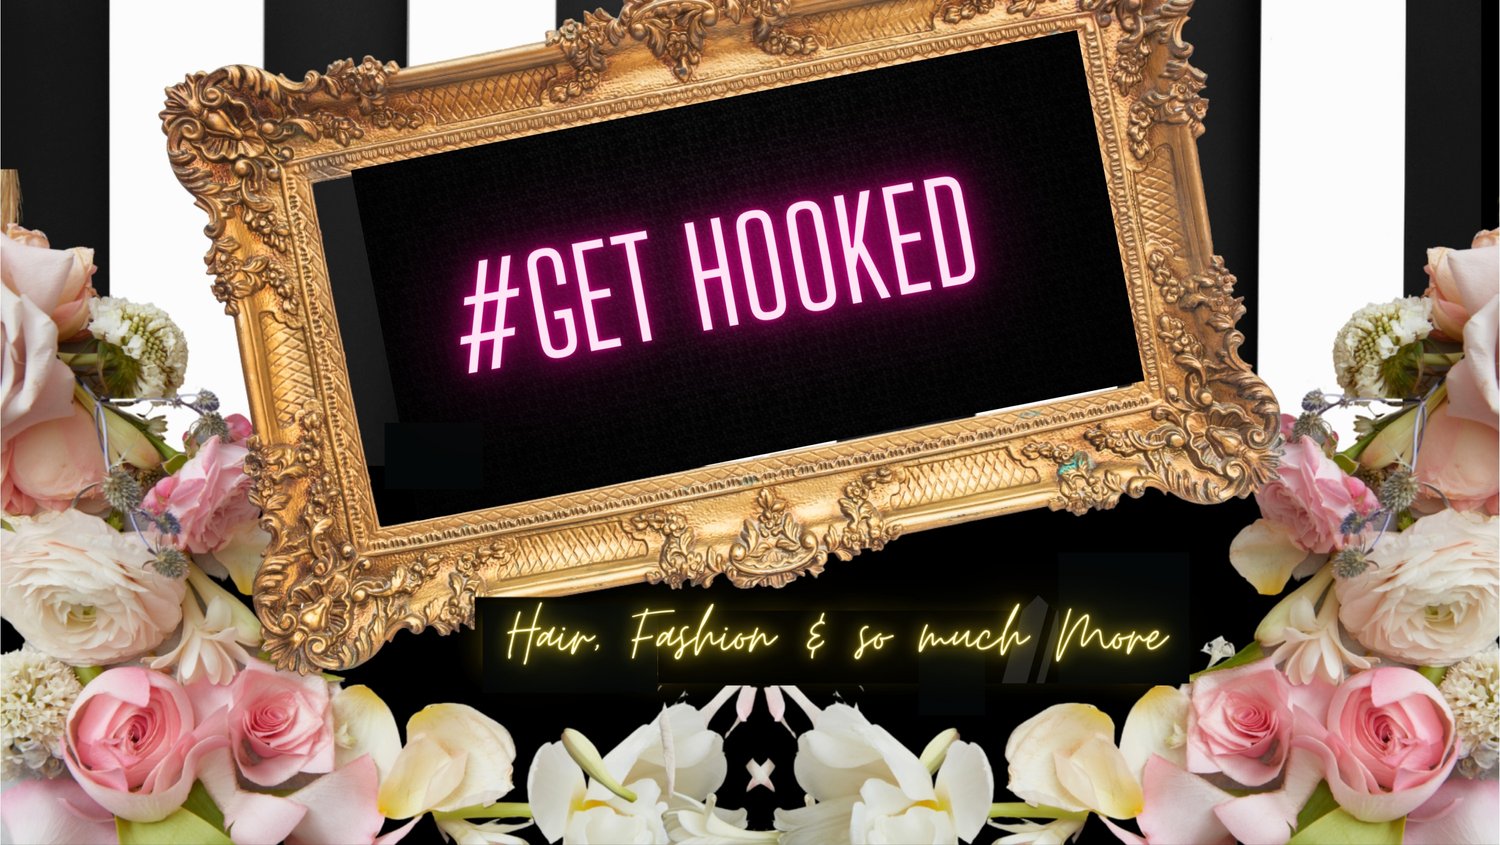 # Get Hooked by Tisha